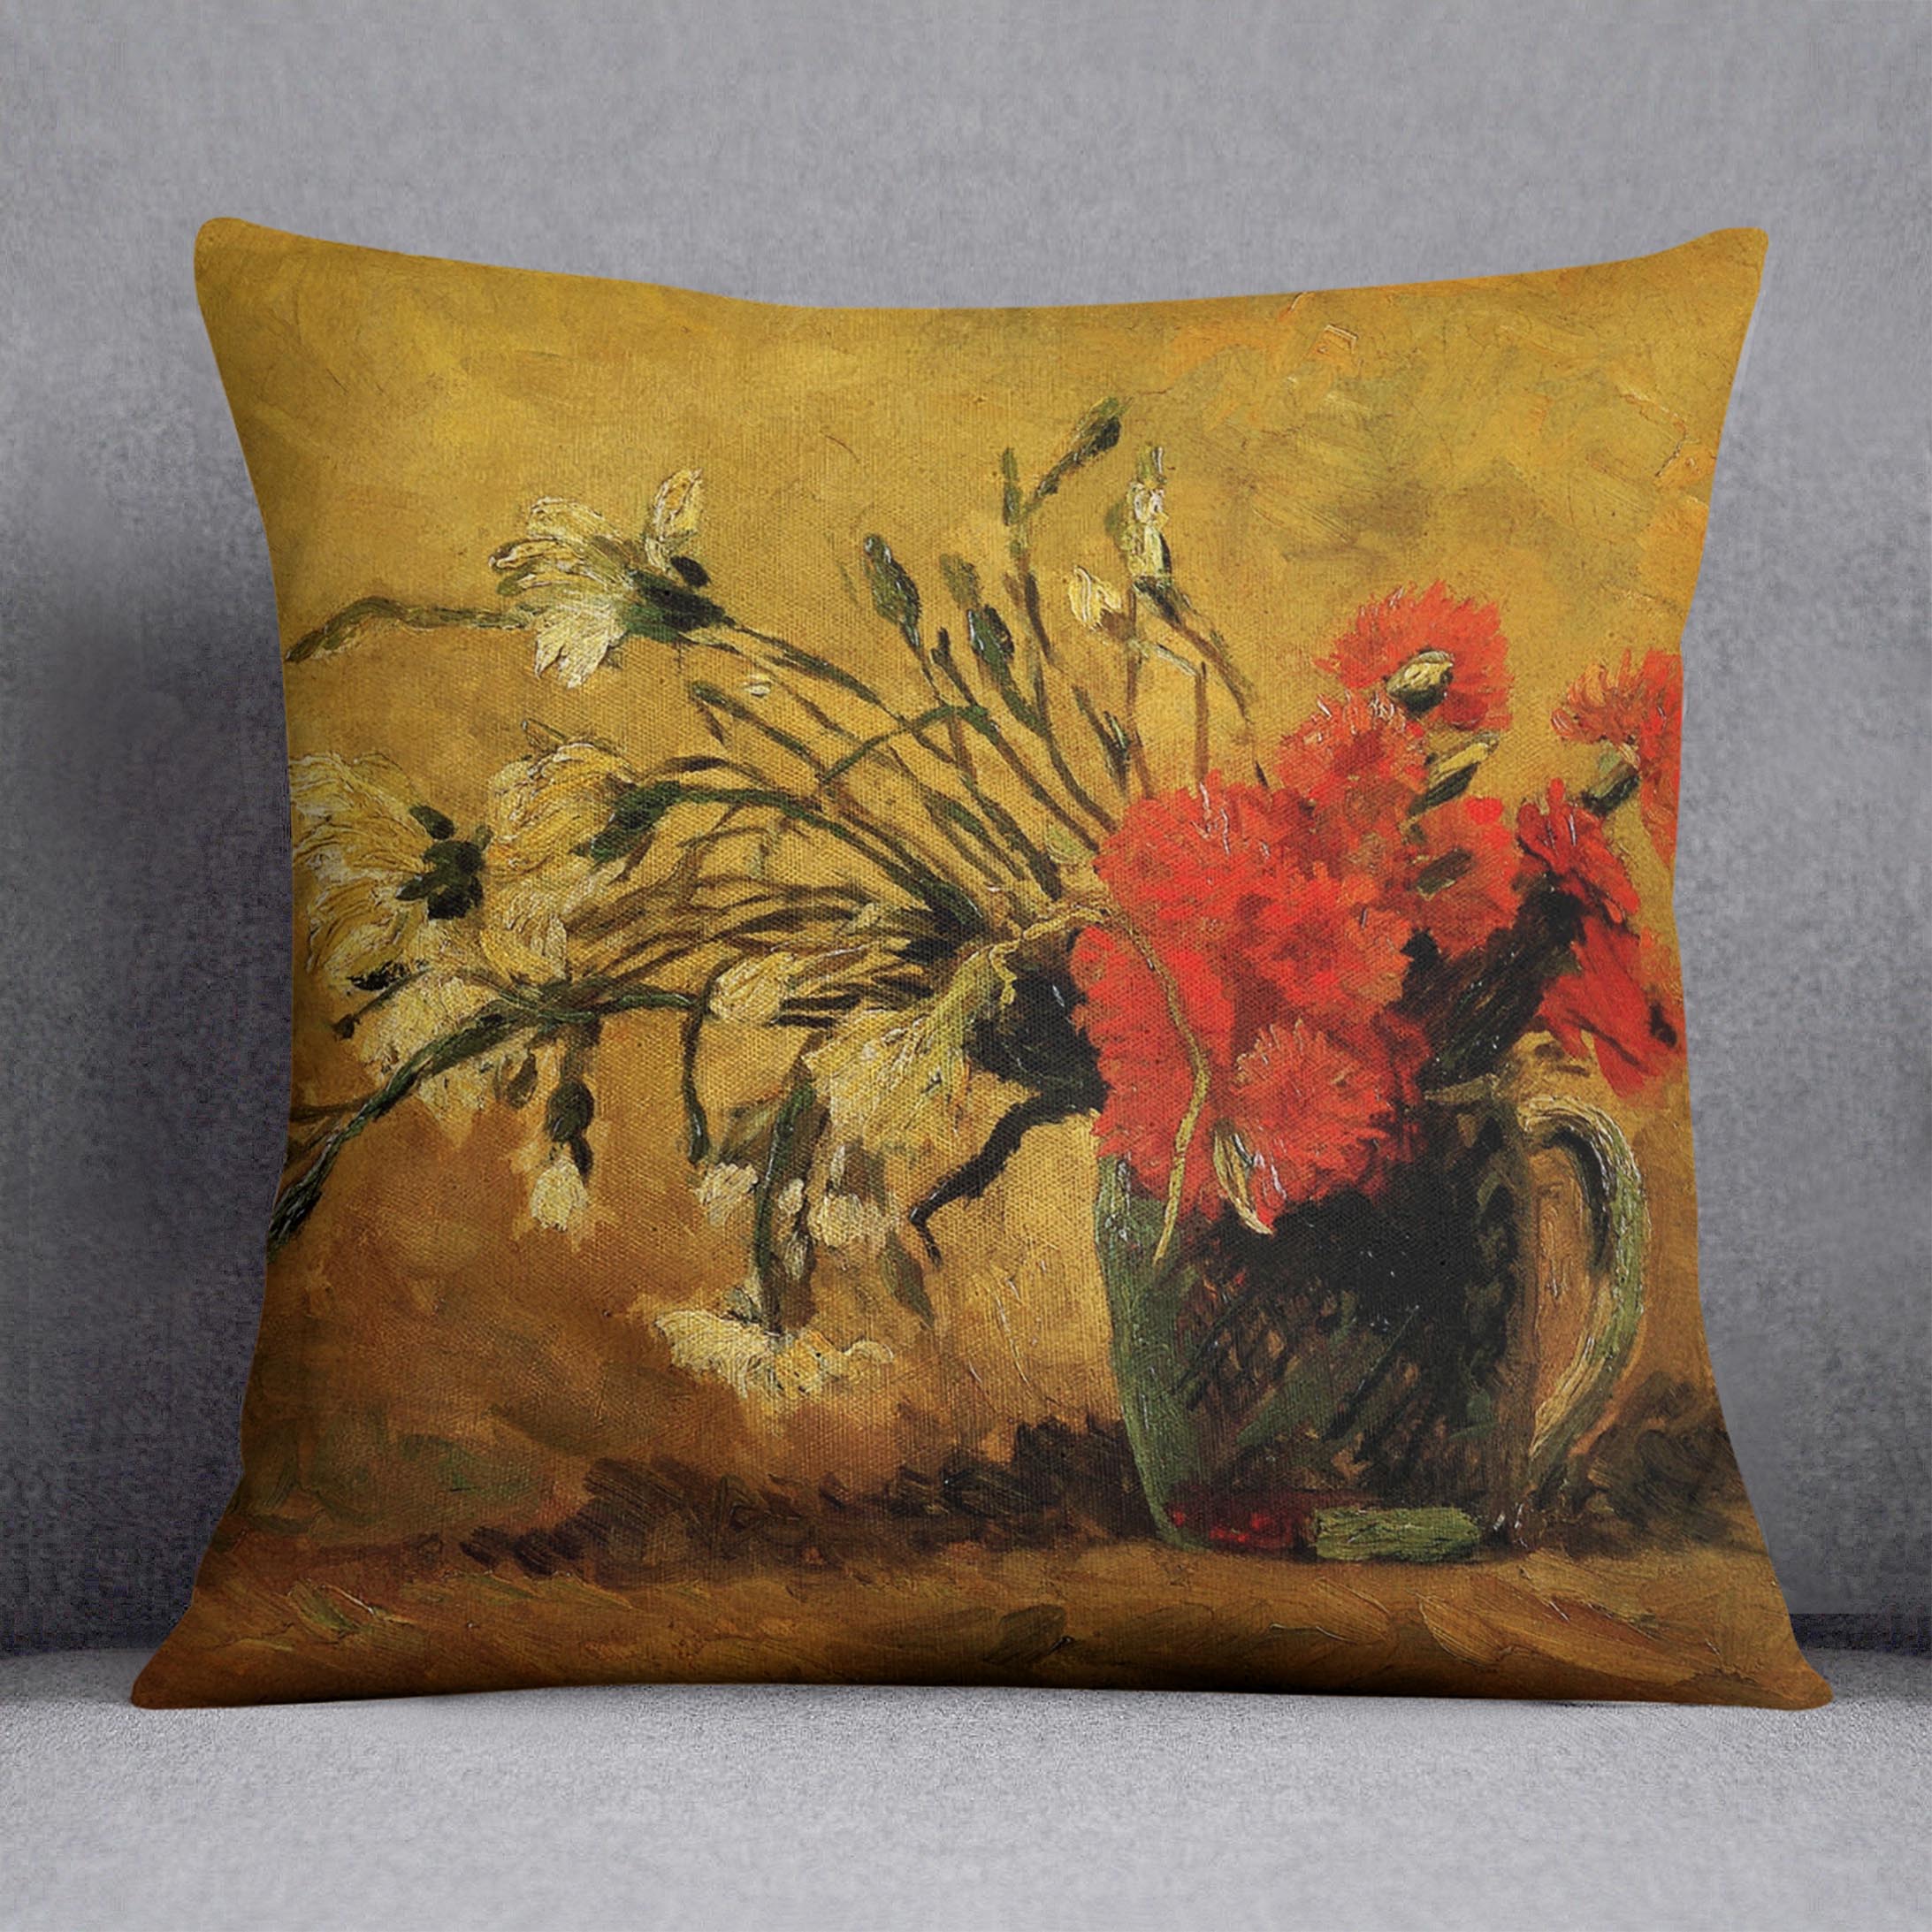 Vase with Red and White Carnations on Yellow Background by Van Gogh Cushion